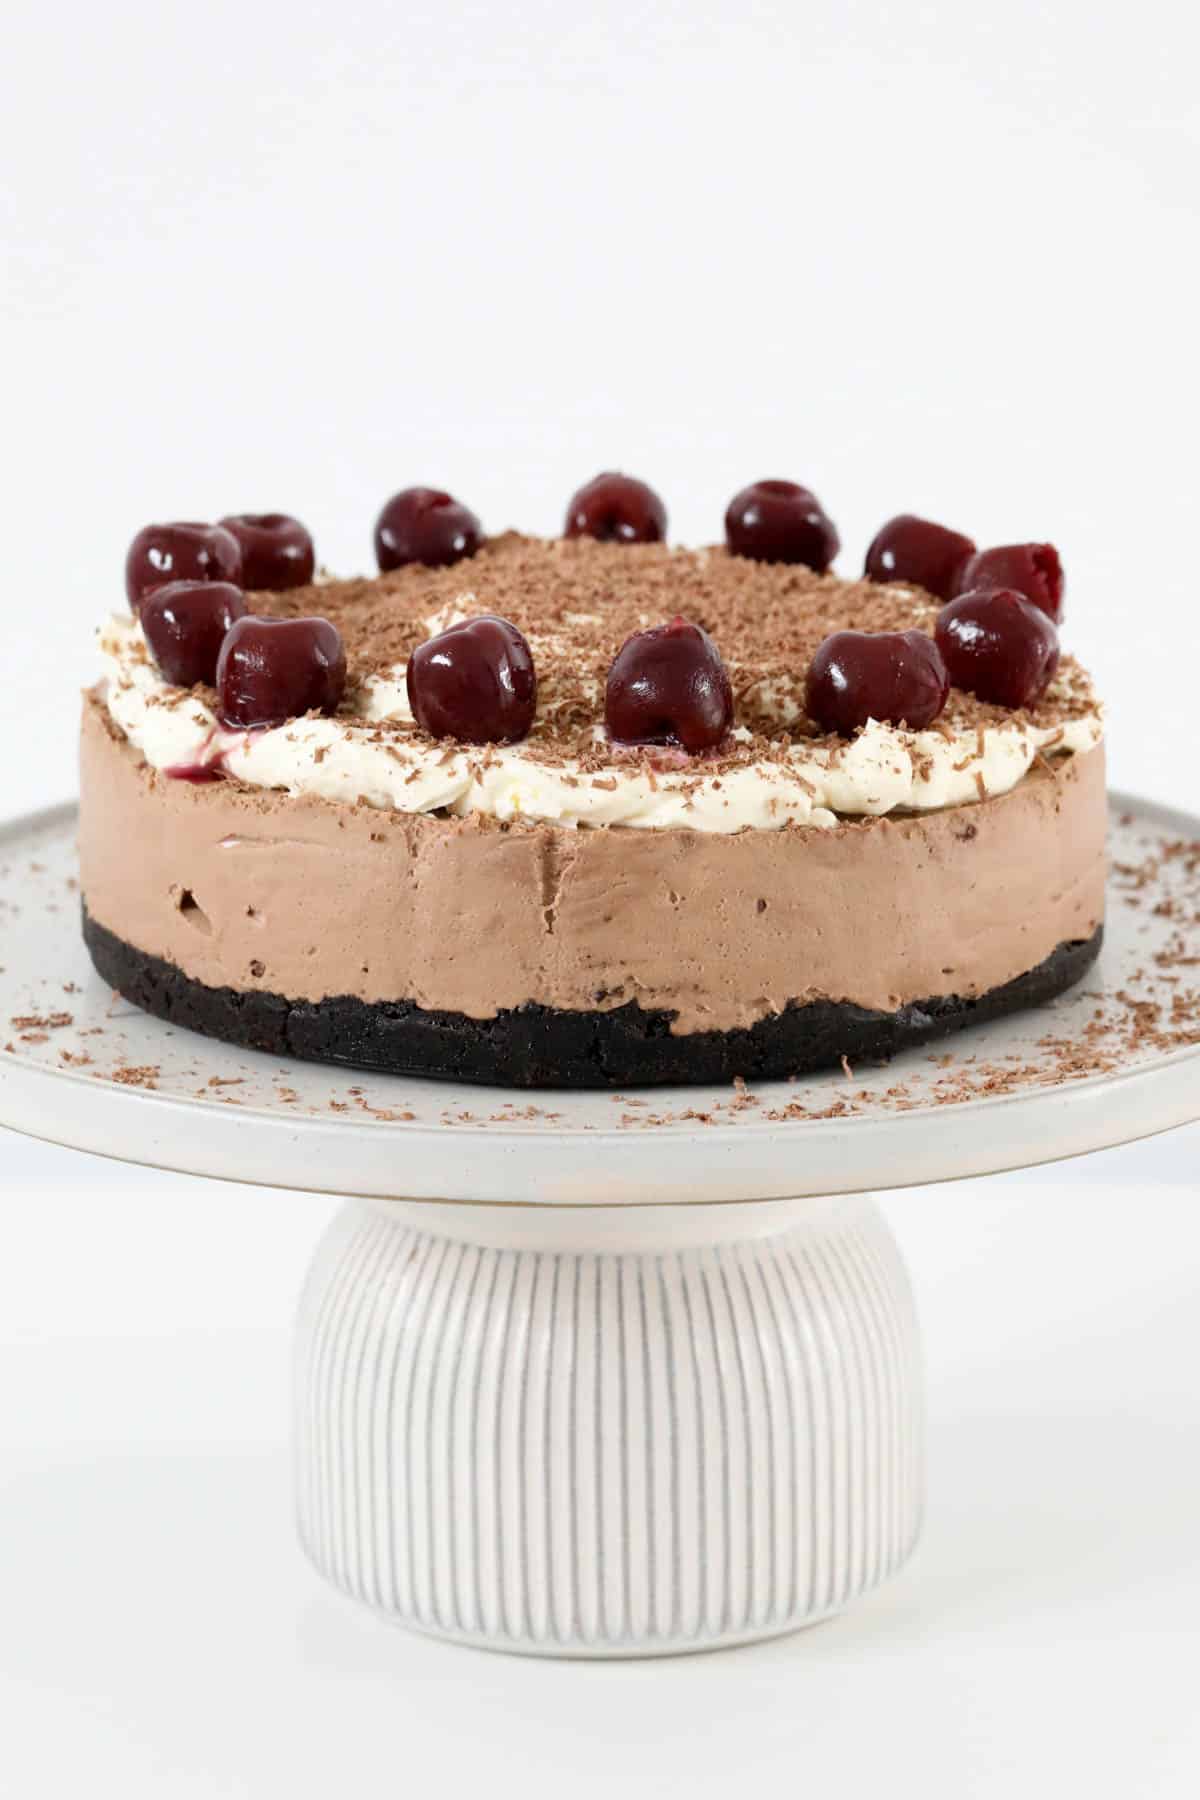 A Black Forest cheesecake on a cake stand.